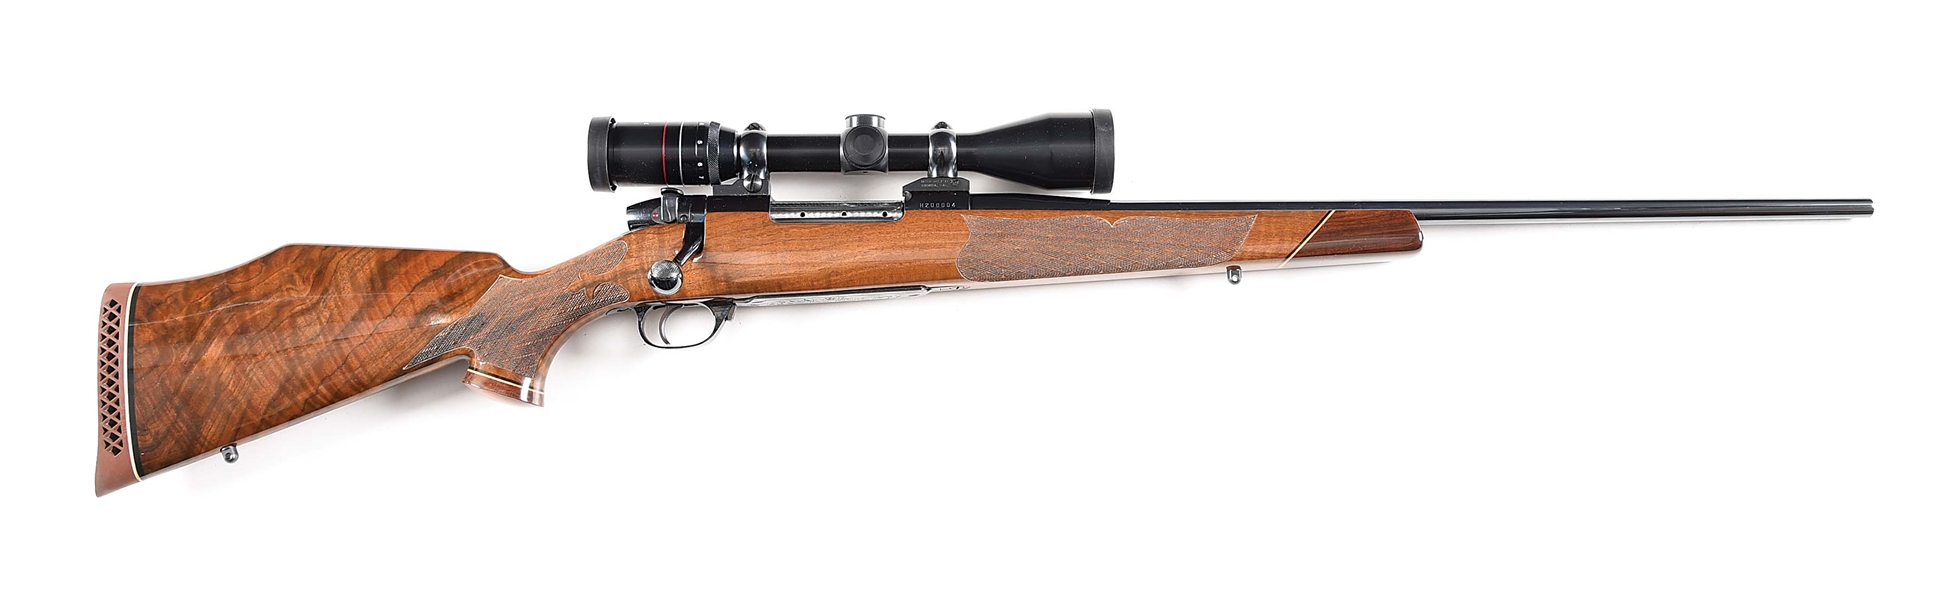 (M) WEATHERBY MARK V BOLT ACTION RIFLE IN 7MM WEATHERBY MAGNUM.